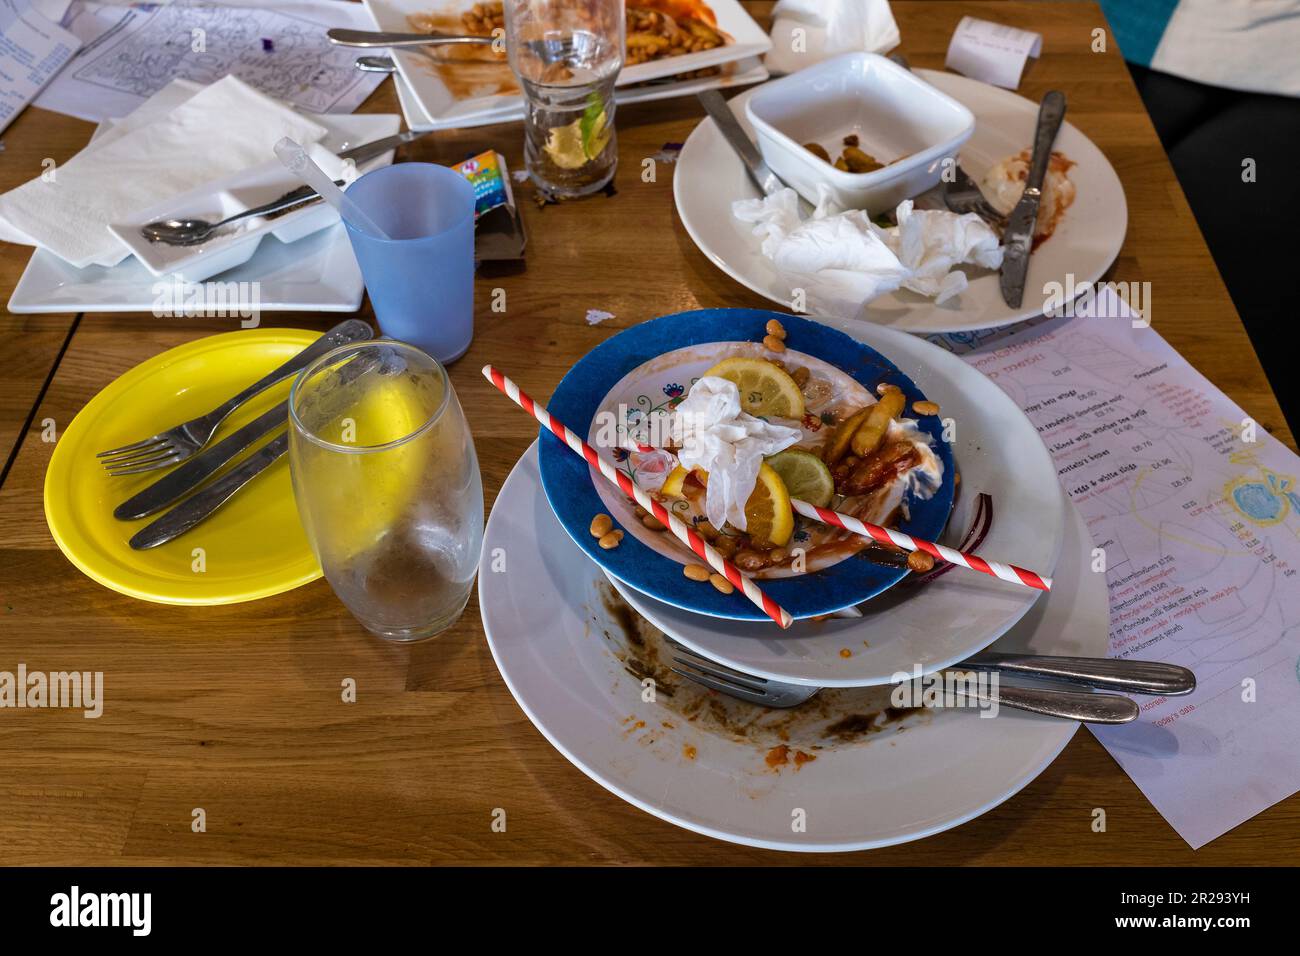 A table in a restaurant cluttered with dirty dishes after a meal. Stock Photo